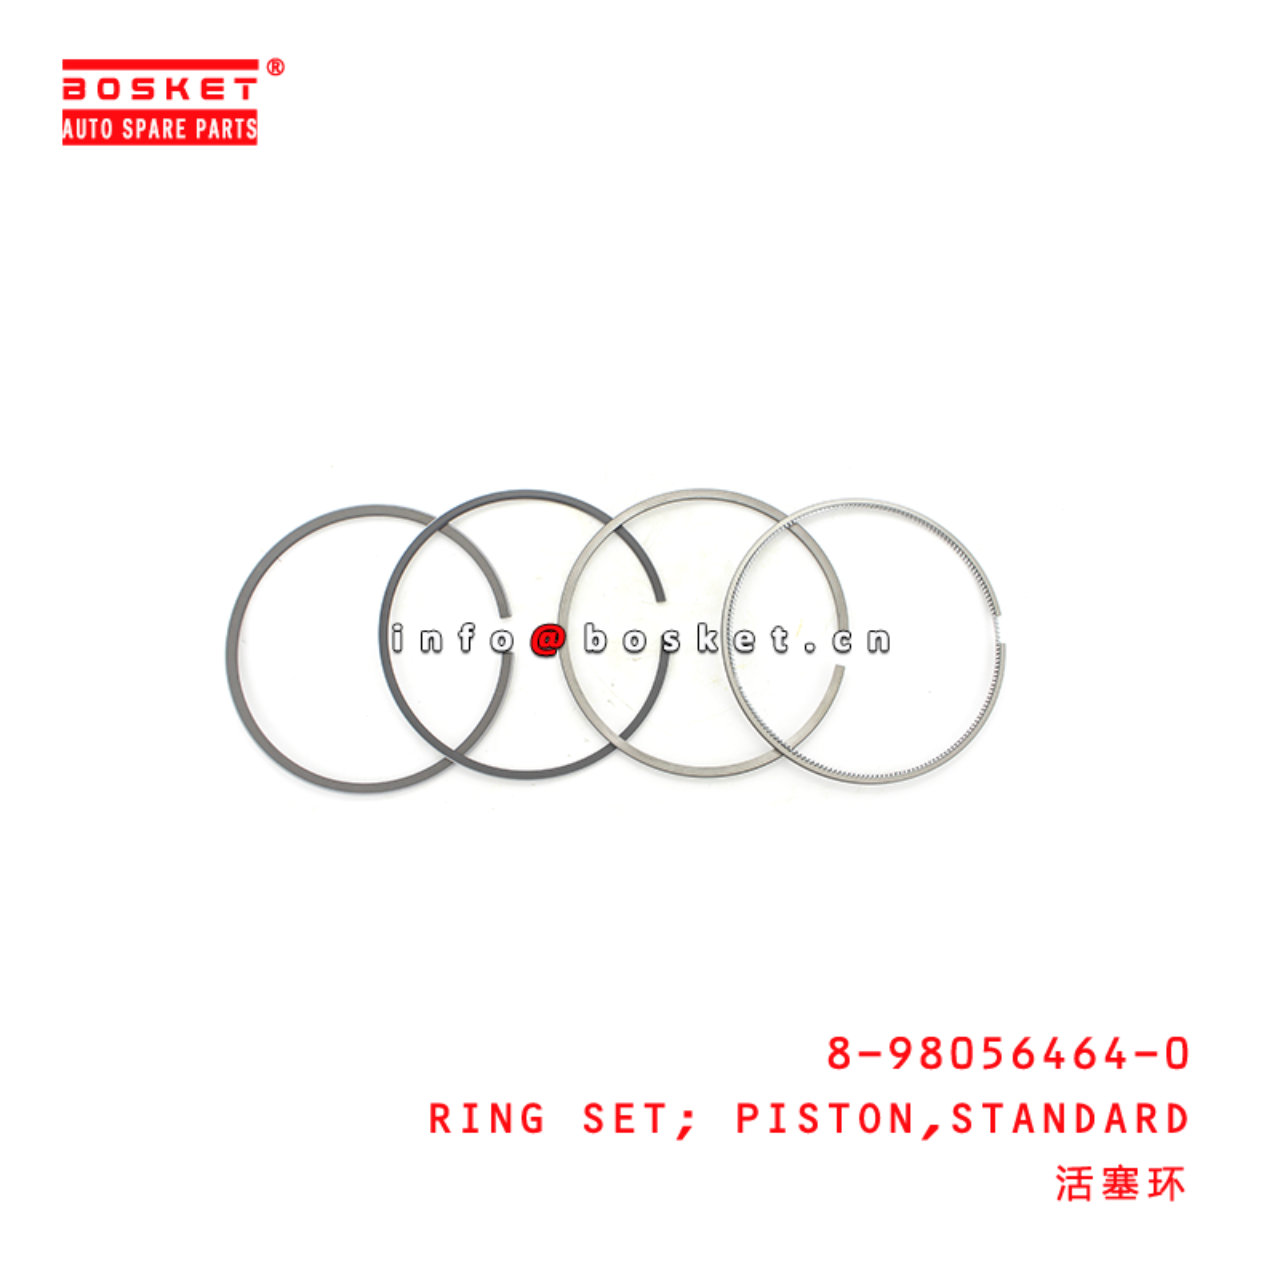 8-98056464-0 Standard Piston Ring Set Suitable for...